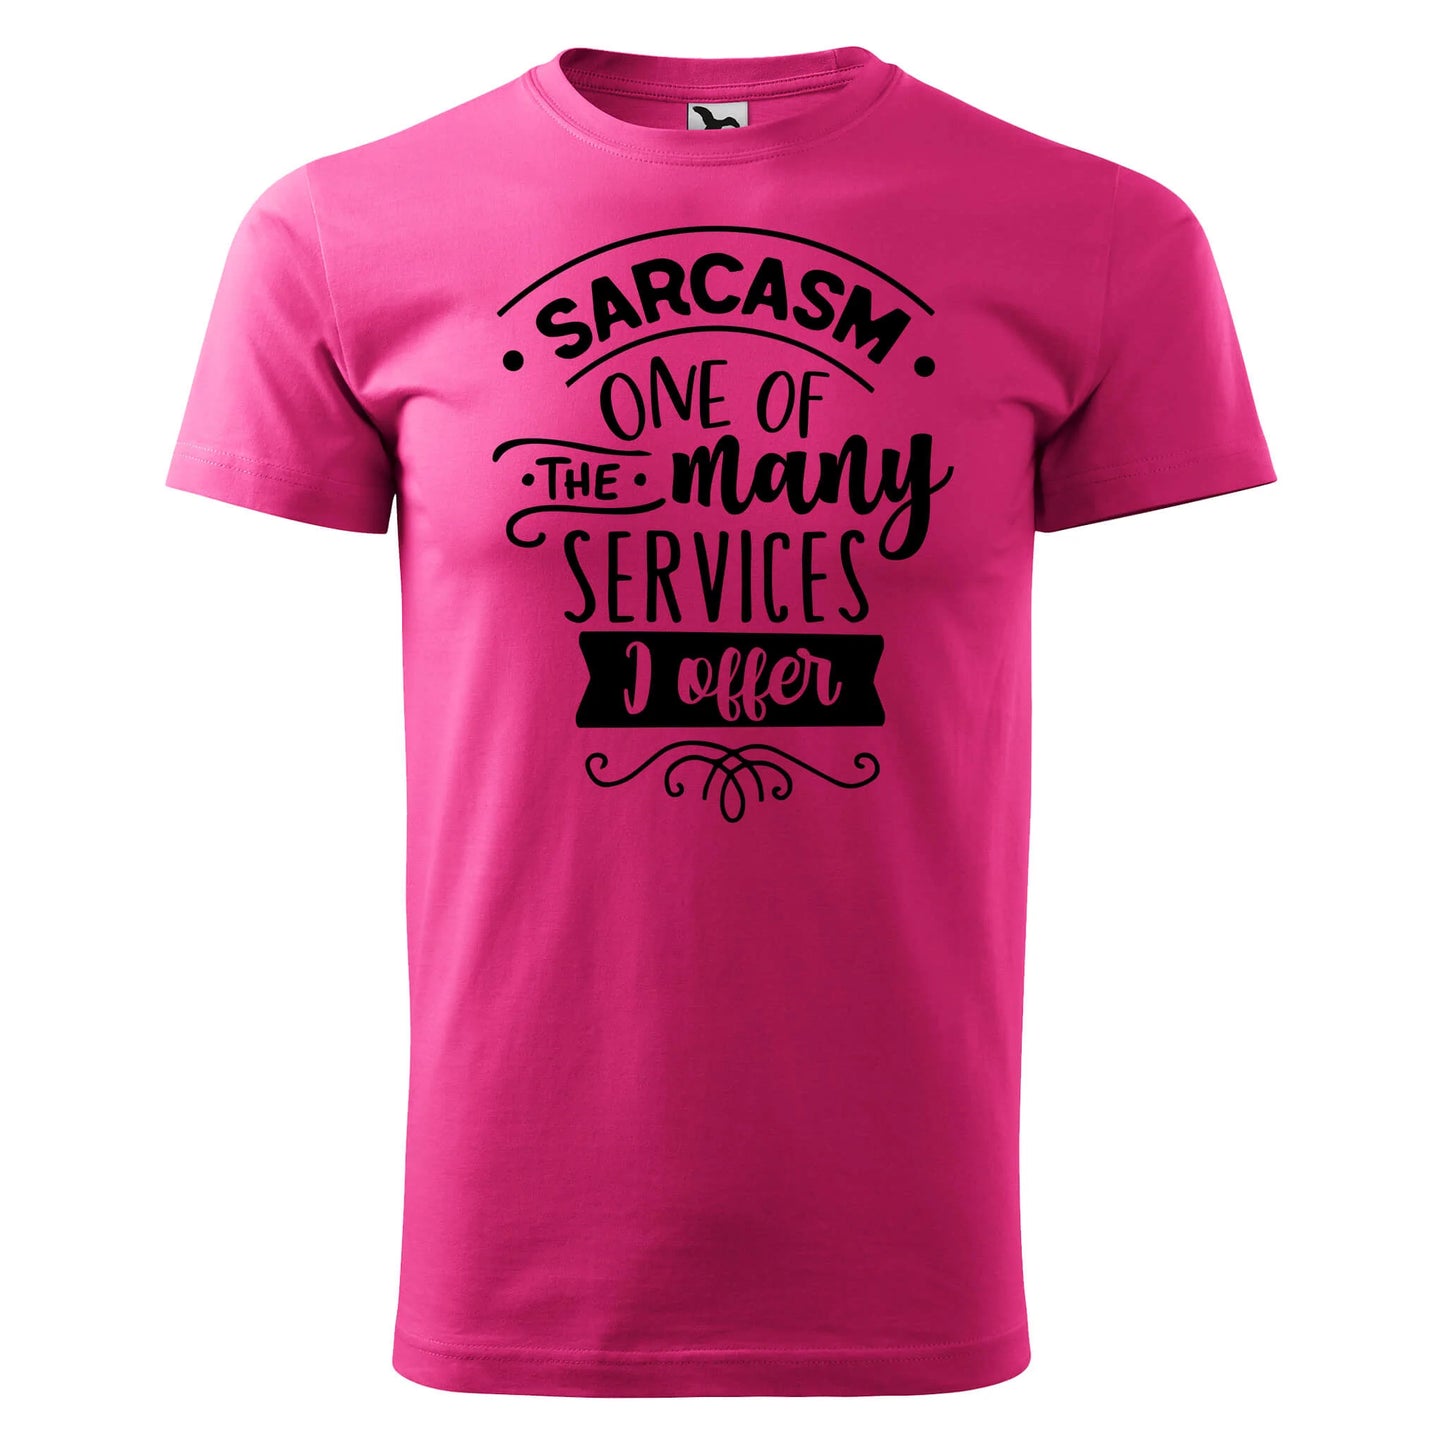 Sarcasm one of the services t-shirt - rvdesignprint